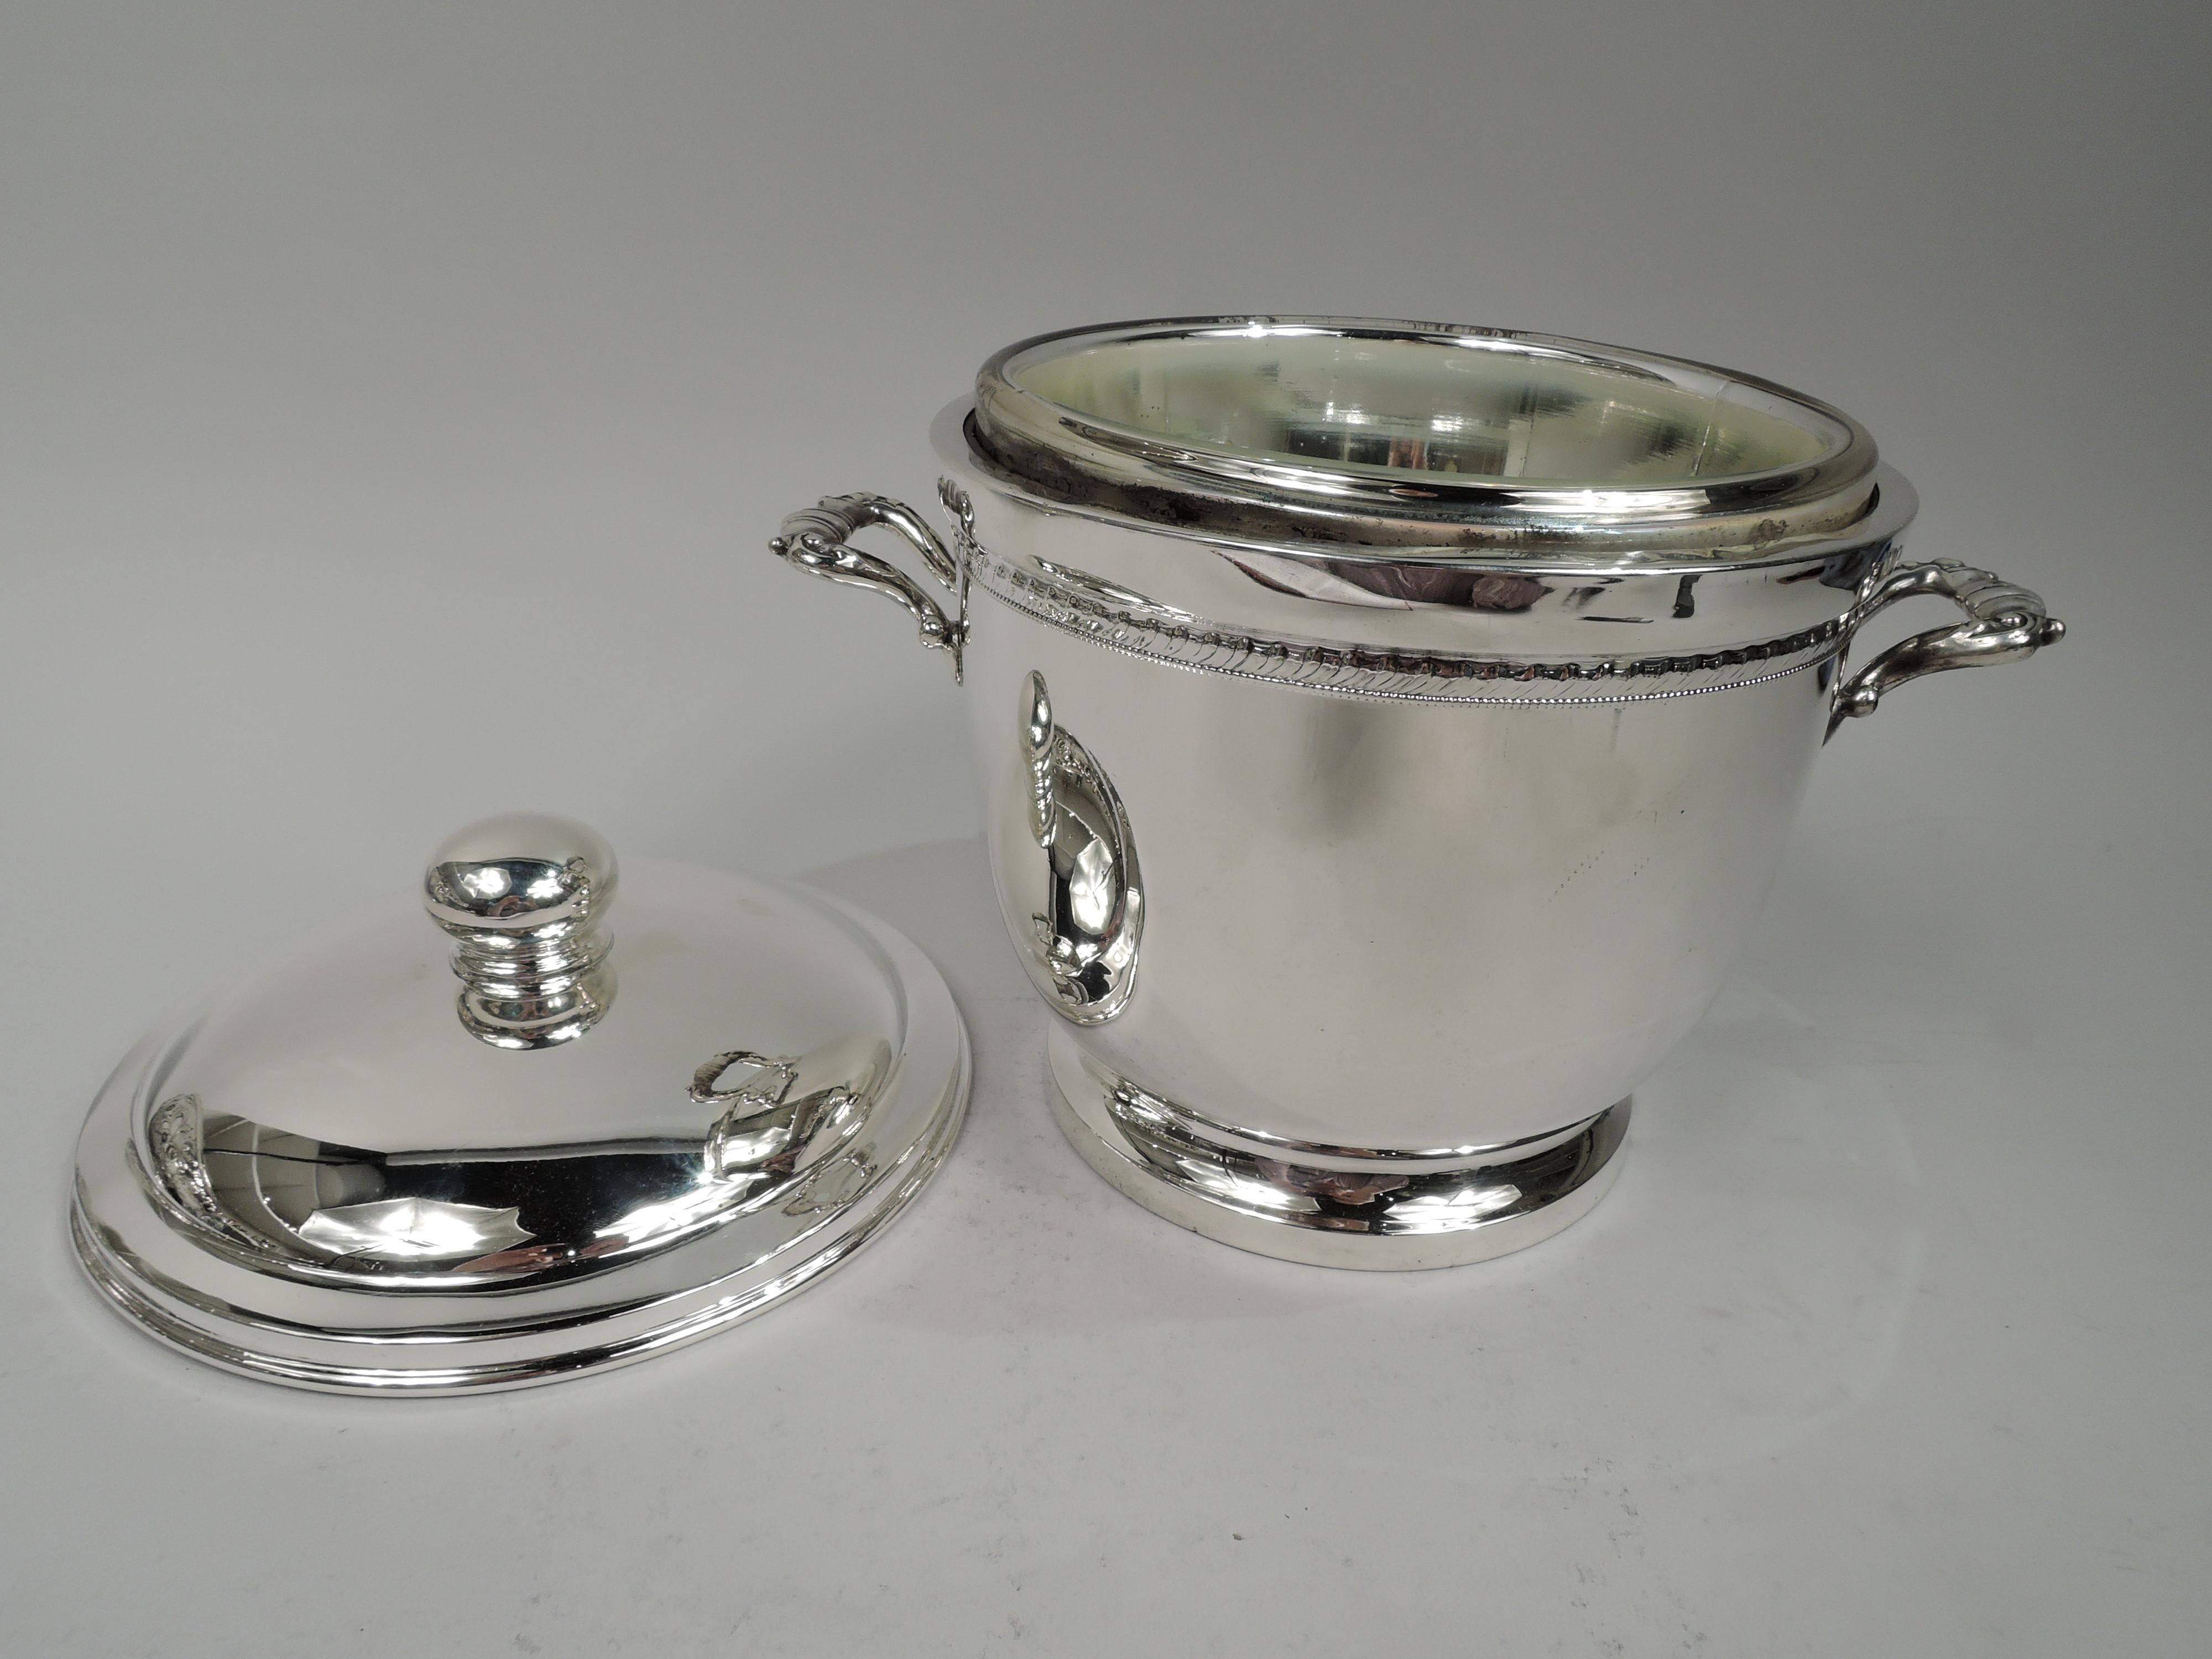 Midcentury Georgian sterling silver ice bucket. Retailed by Cartier in New York. Urn with gadrooned and beaded borders. Capped and scrolled side handles and raised foot. Cover domed with ball finial. Insulated interior. Fully marked including